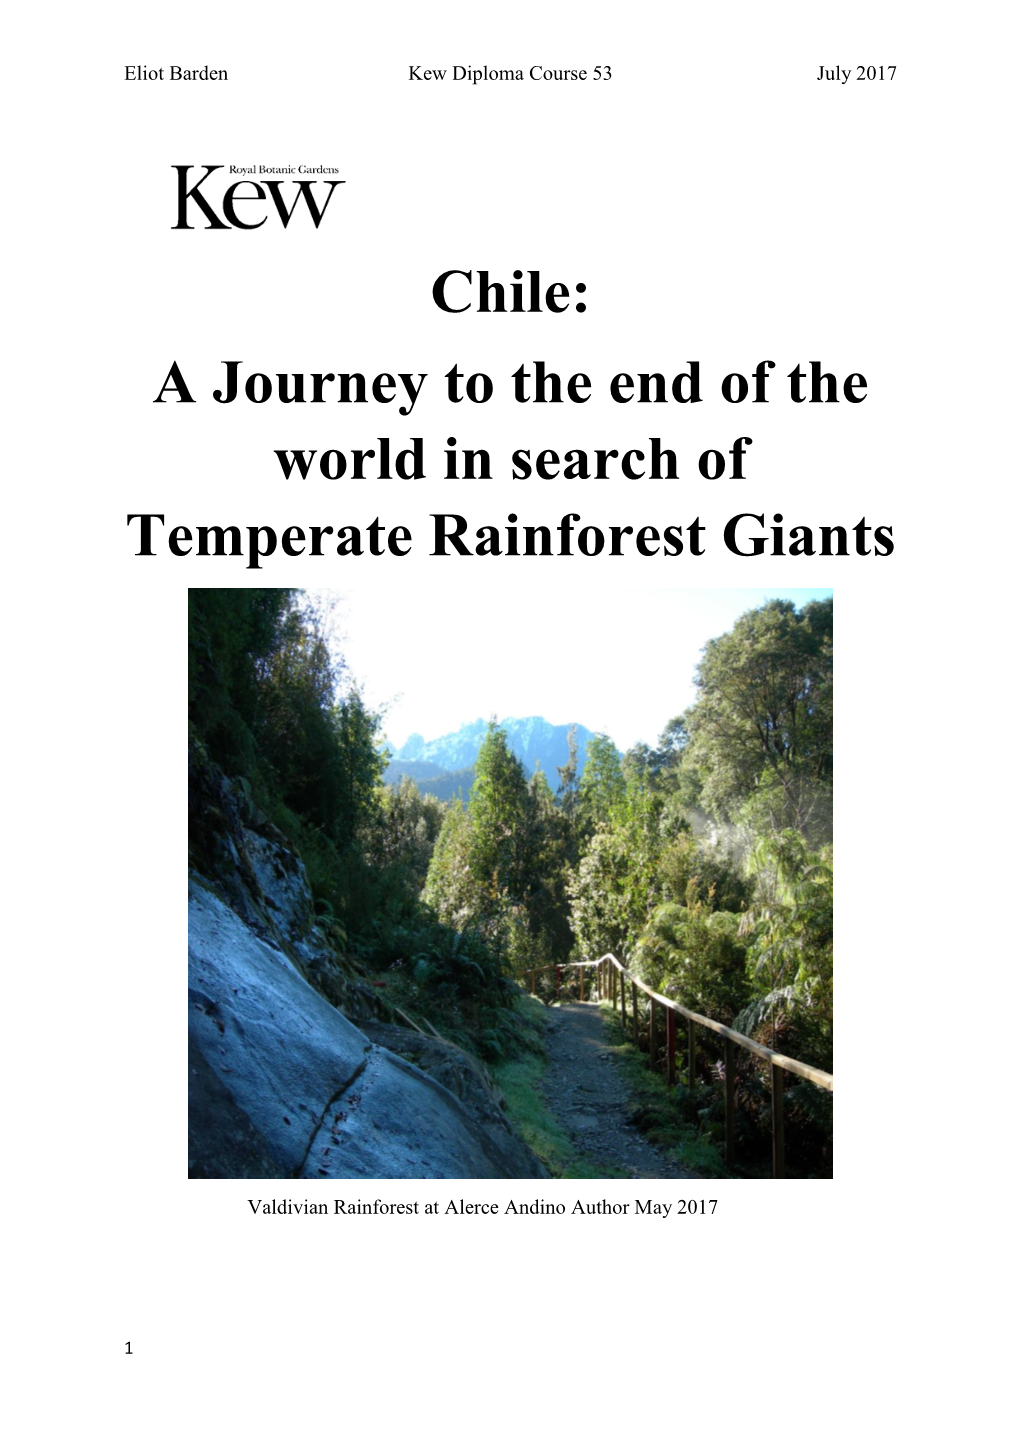 Chile: a Journey to the End of the World in Search of Temperate Rainforest Giants